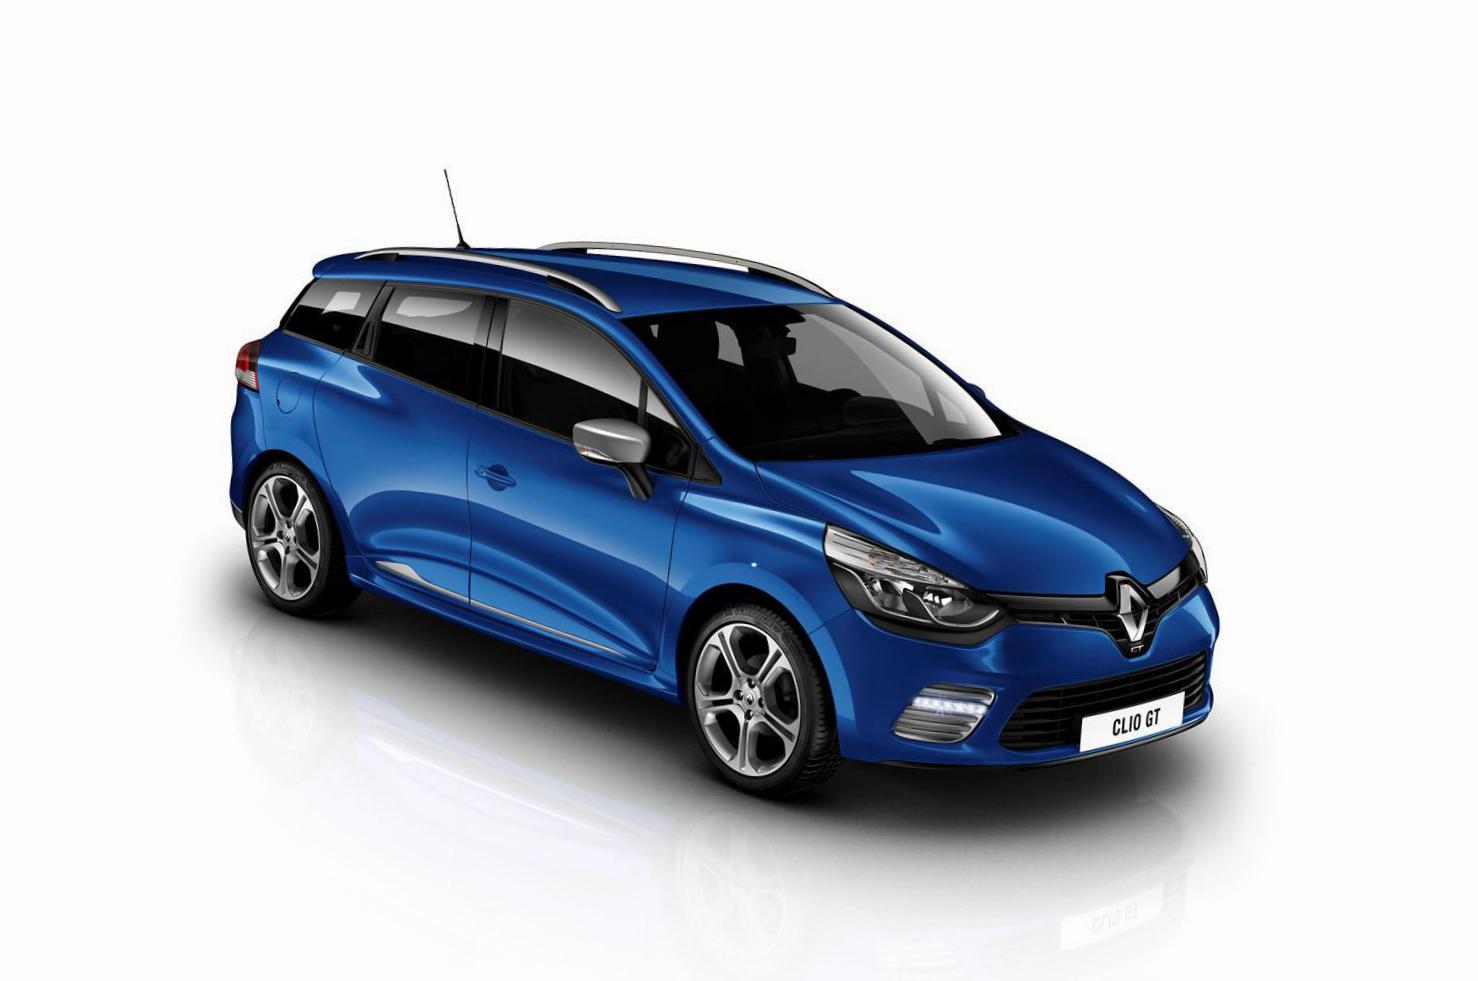 Clio GT Renault approved 2012